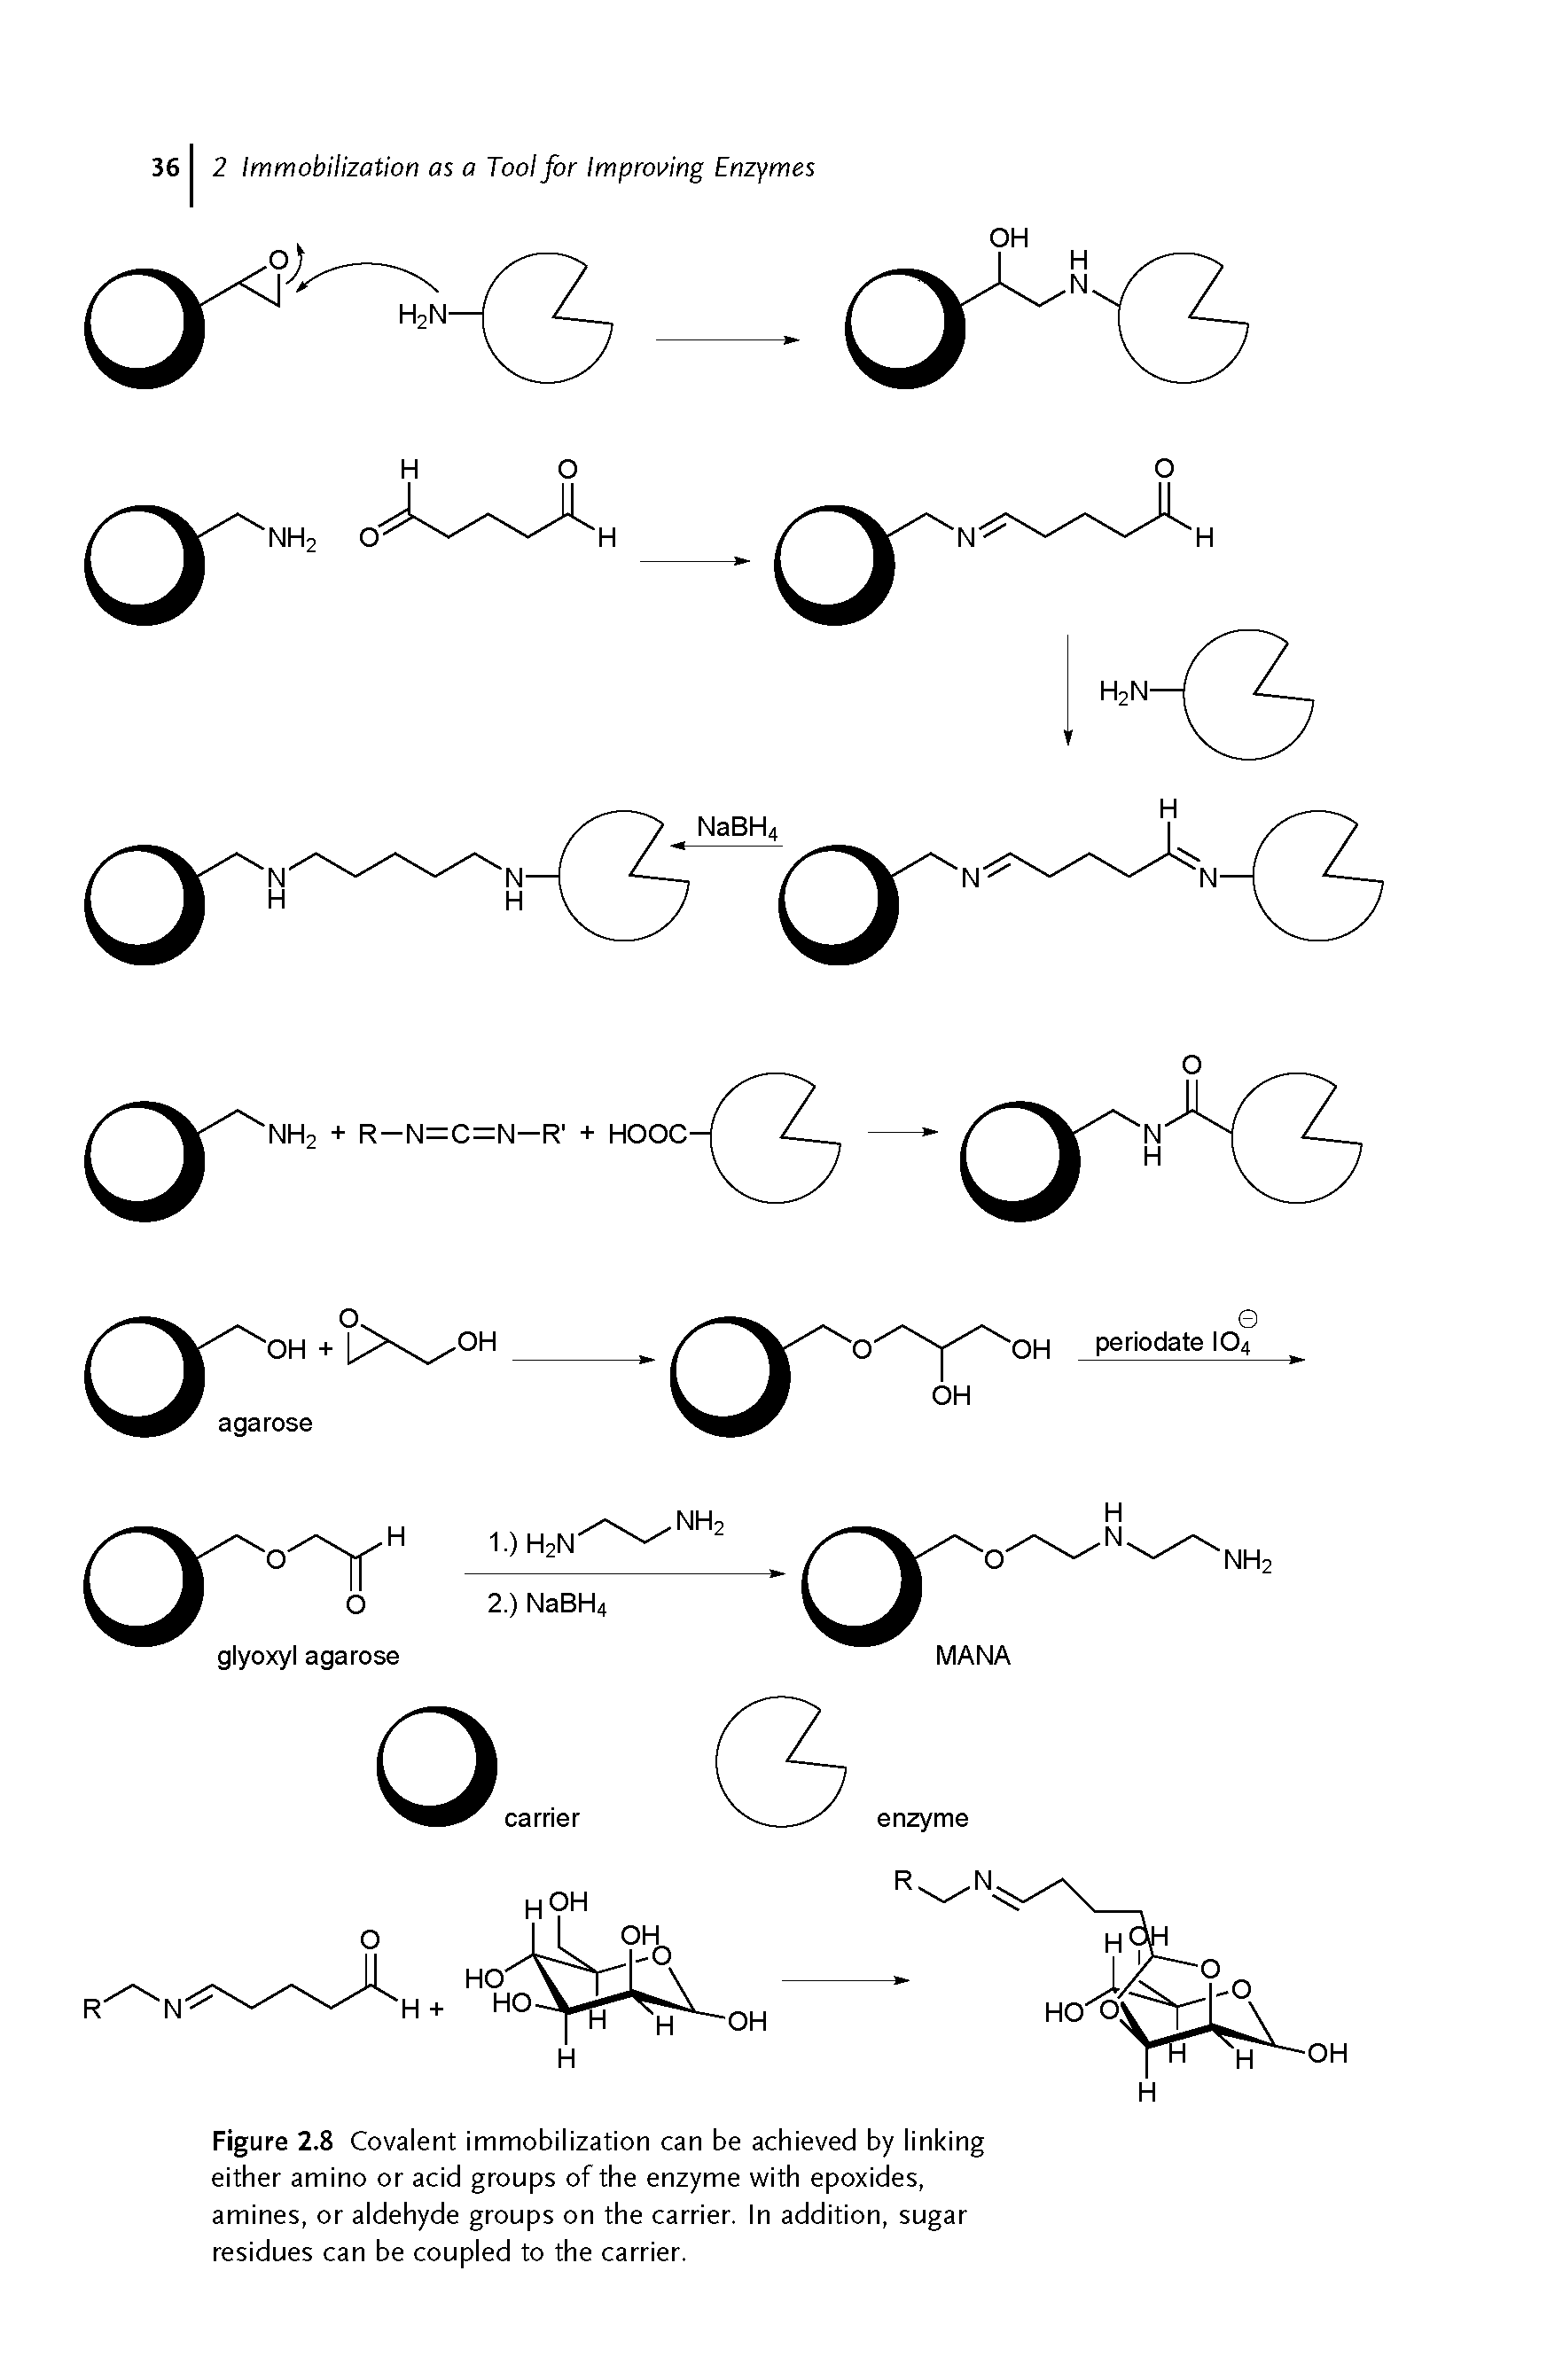 Figure 2.8 Covalent immobilization can be achieved by linking either amino or acid groups of the enzyme with epoxides, amines, or aldehyde groups on the carrier, in addition, sugar residues can be coupled to the carrier.